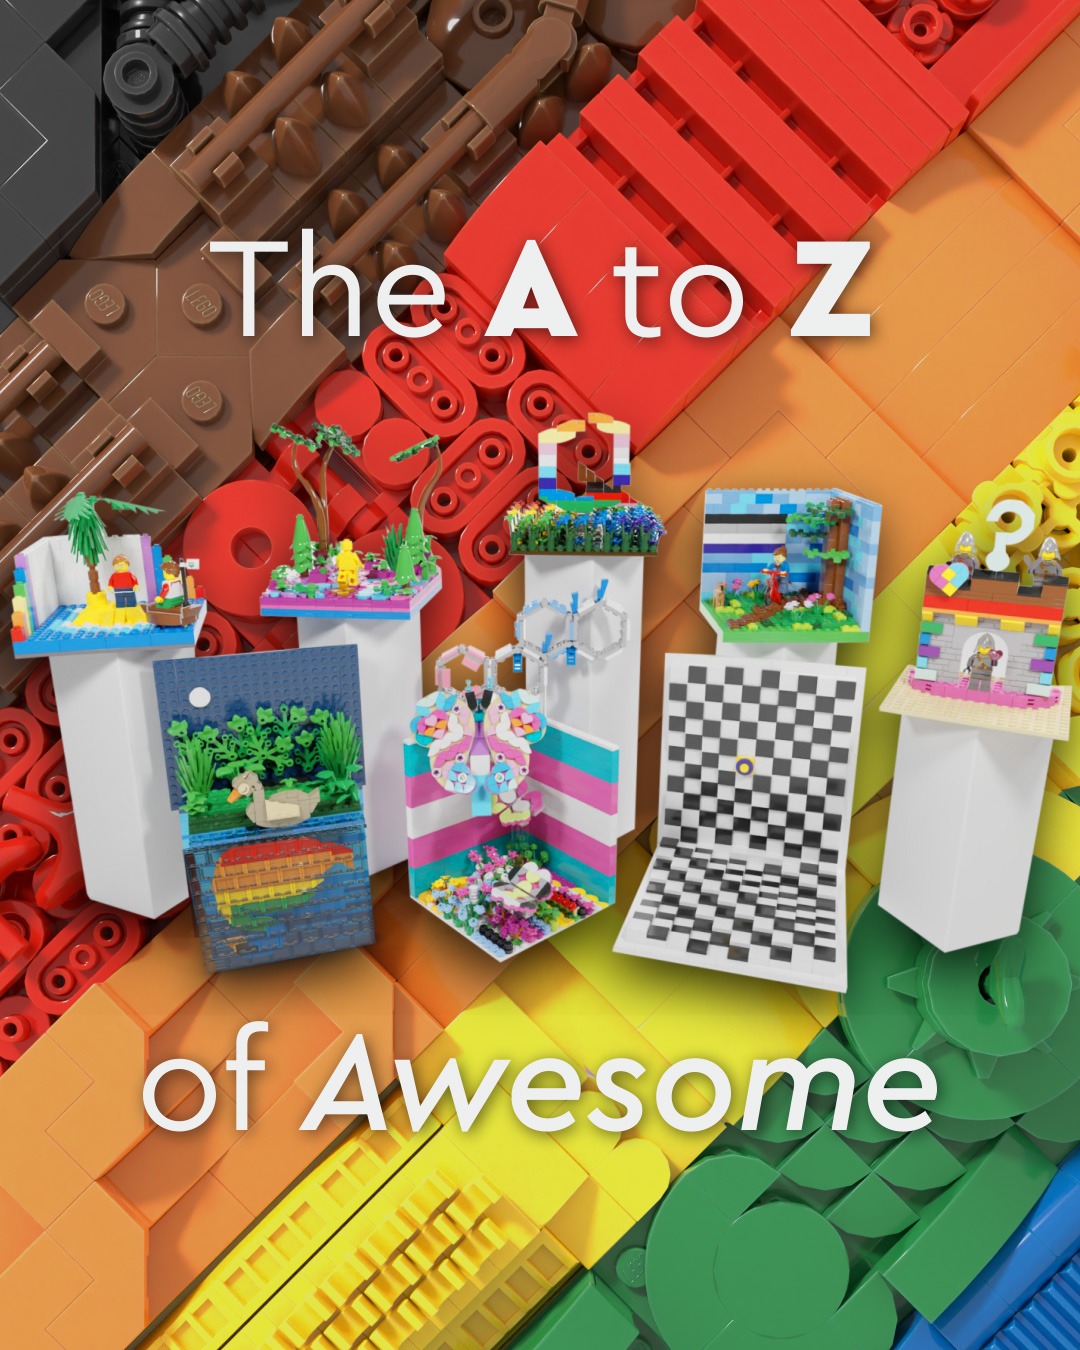 A-Z of Awesome – Because Expression and Identity - About - LEGO.com